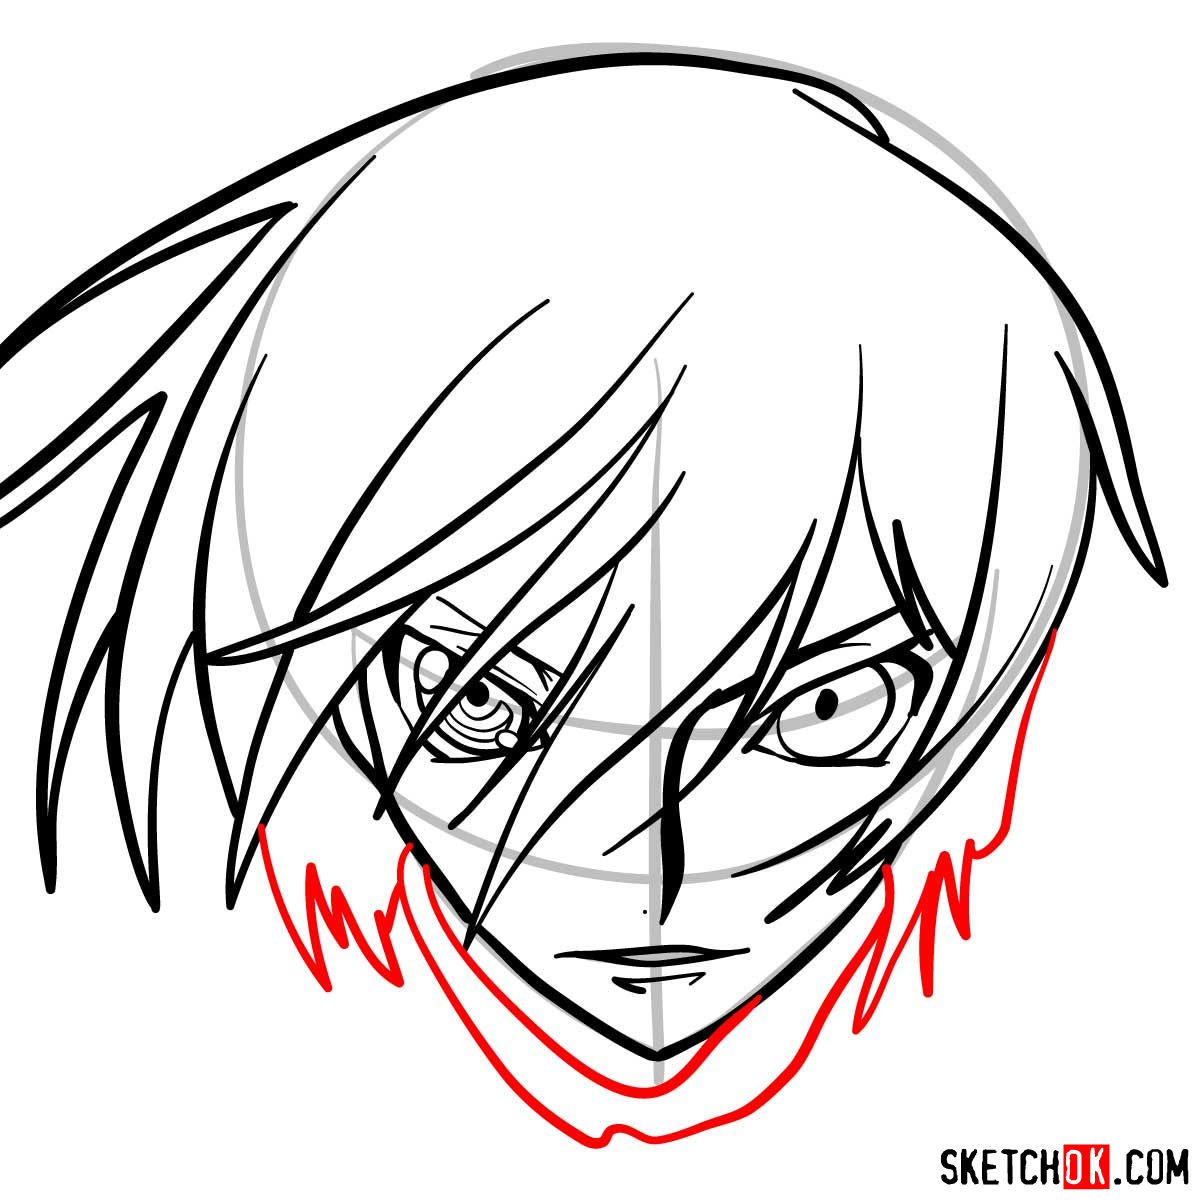 How to draw the face of Lelouch vi Britannia | Code Geass anime - step 06